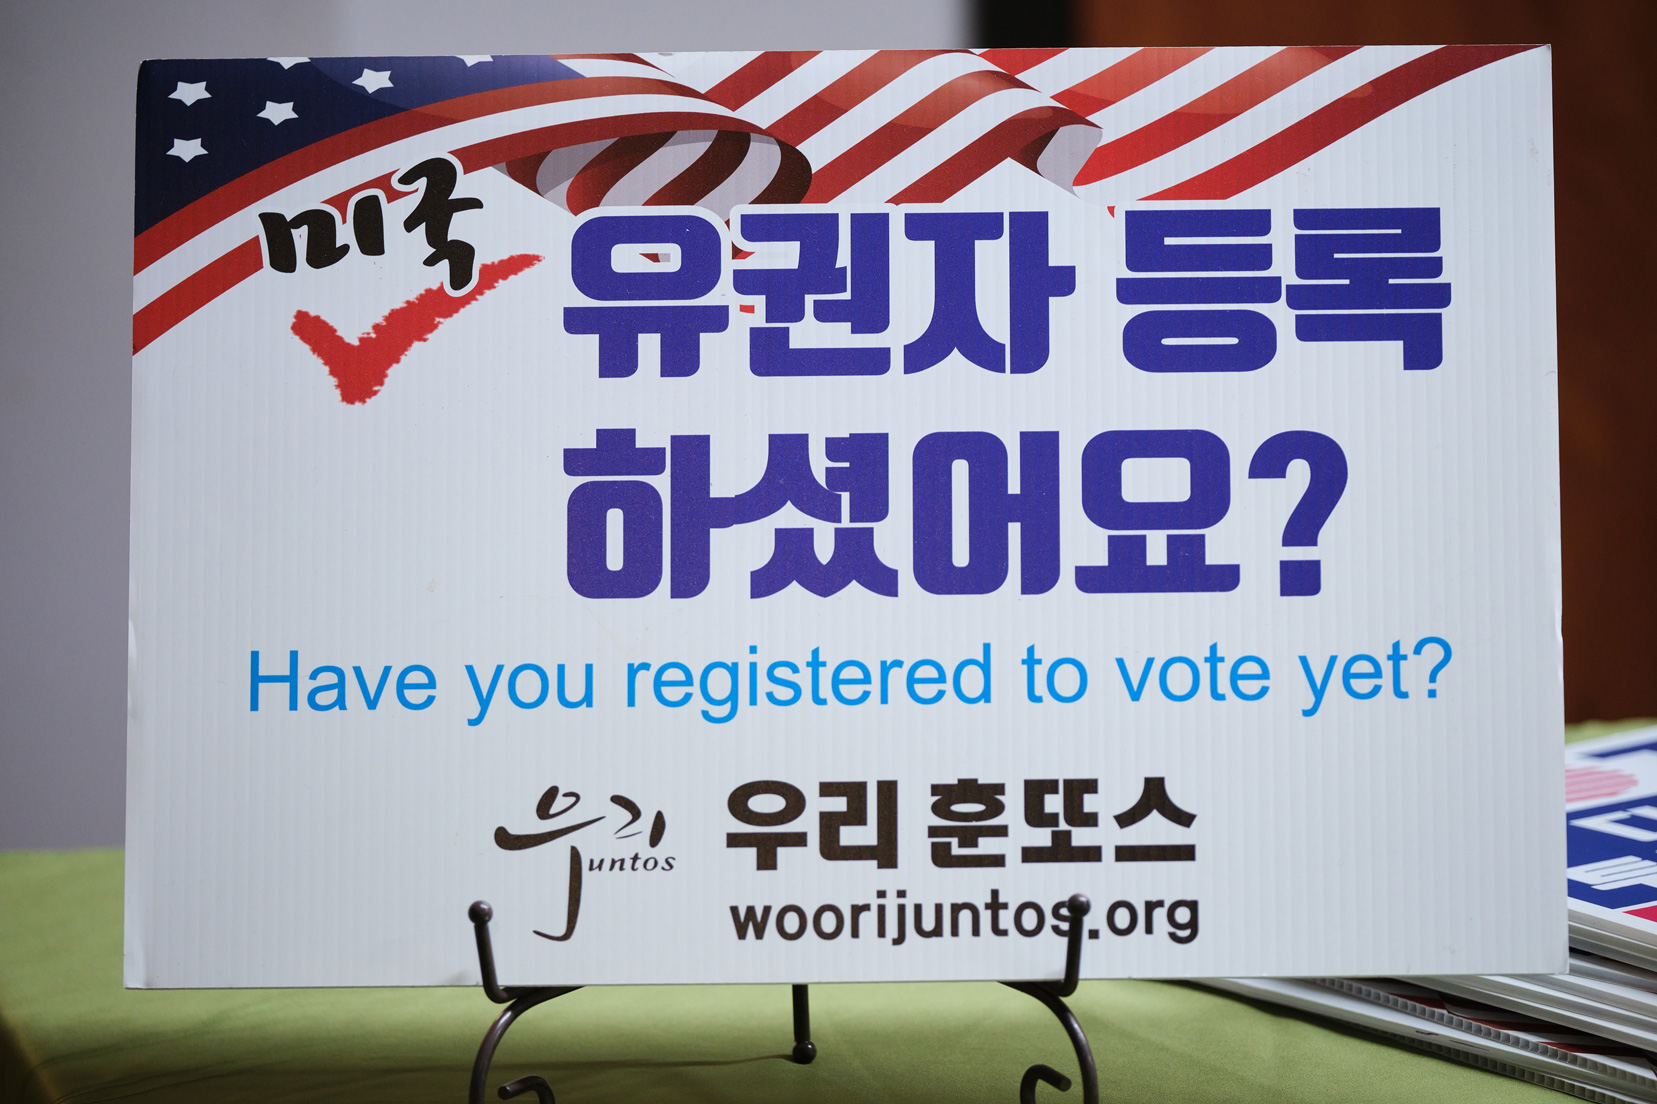 Signage encouraging voting and registering to vote at a voting rights forum at the Korean Community Center